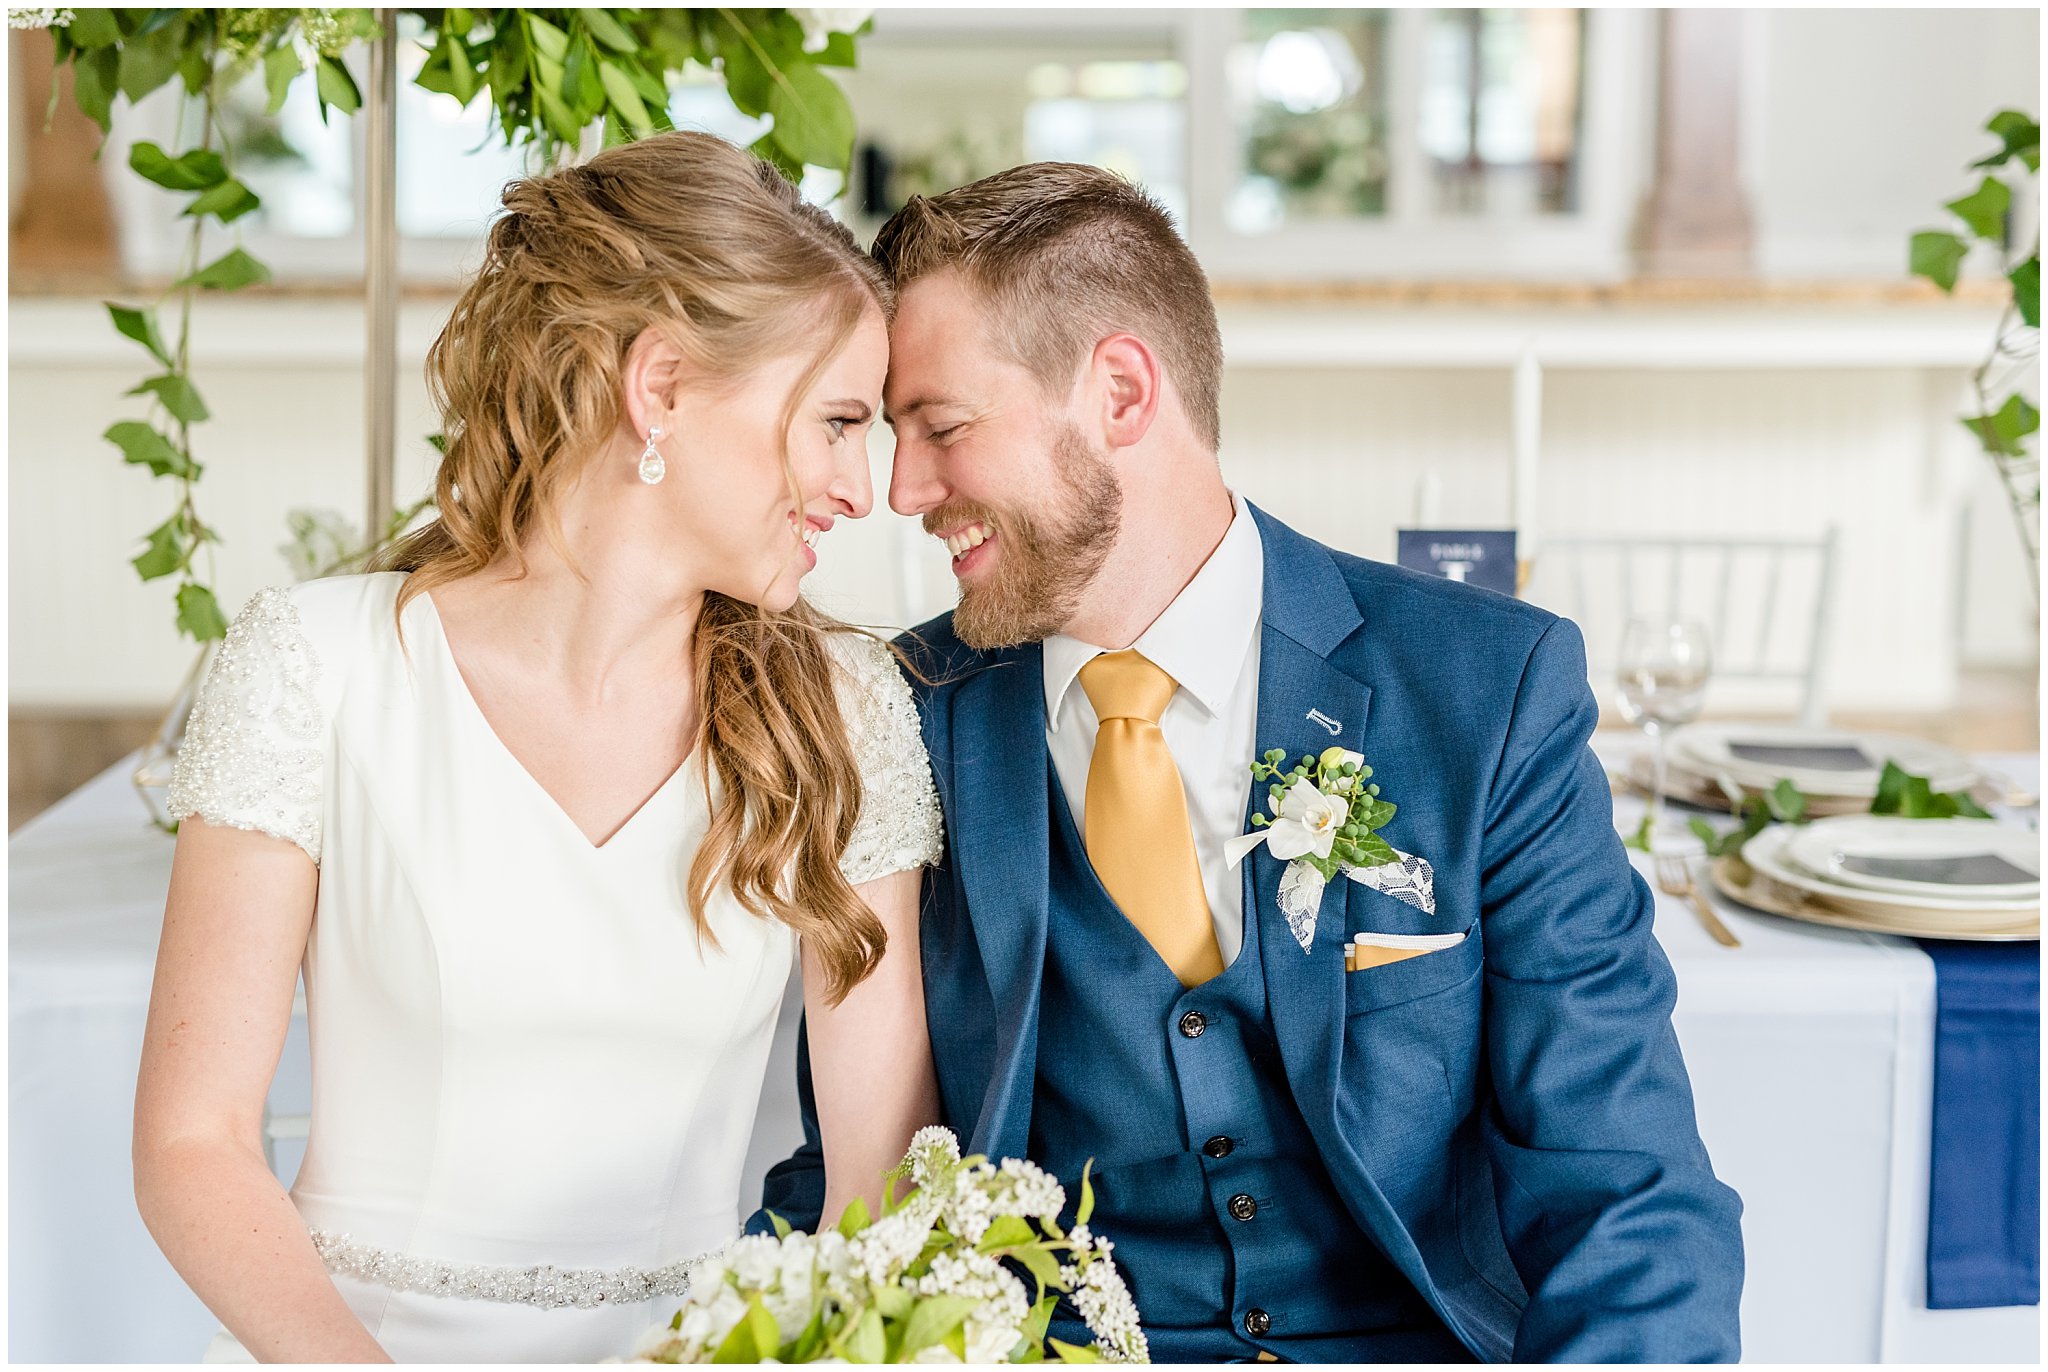 Bride and groom snuggling and smiling on chairs | Navy, white and gold wedding | Talia Event Center